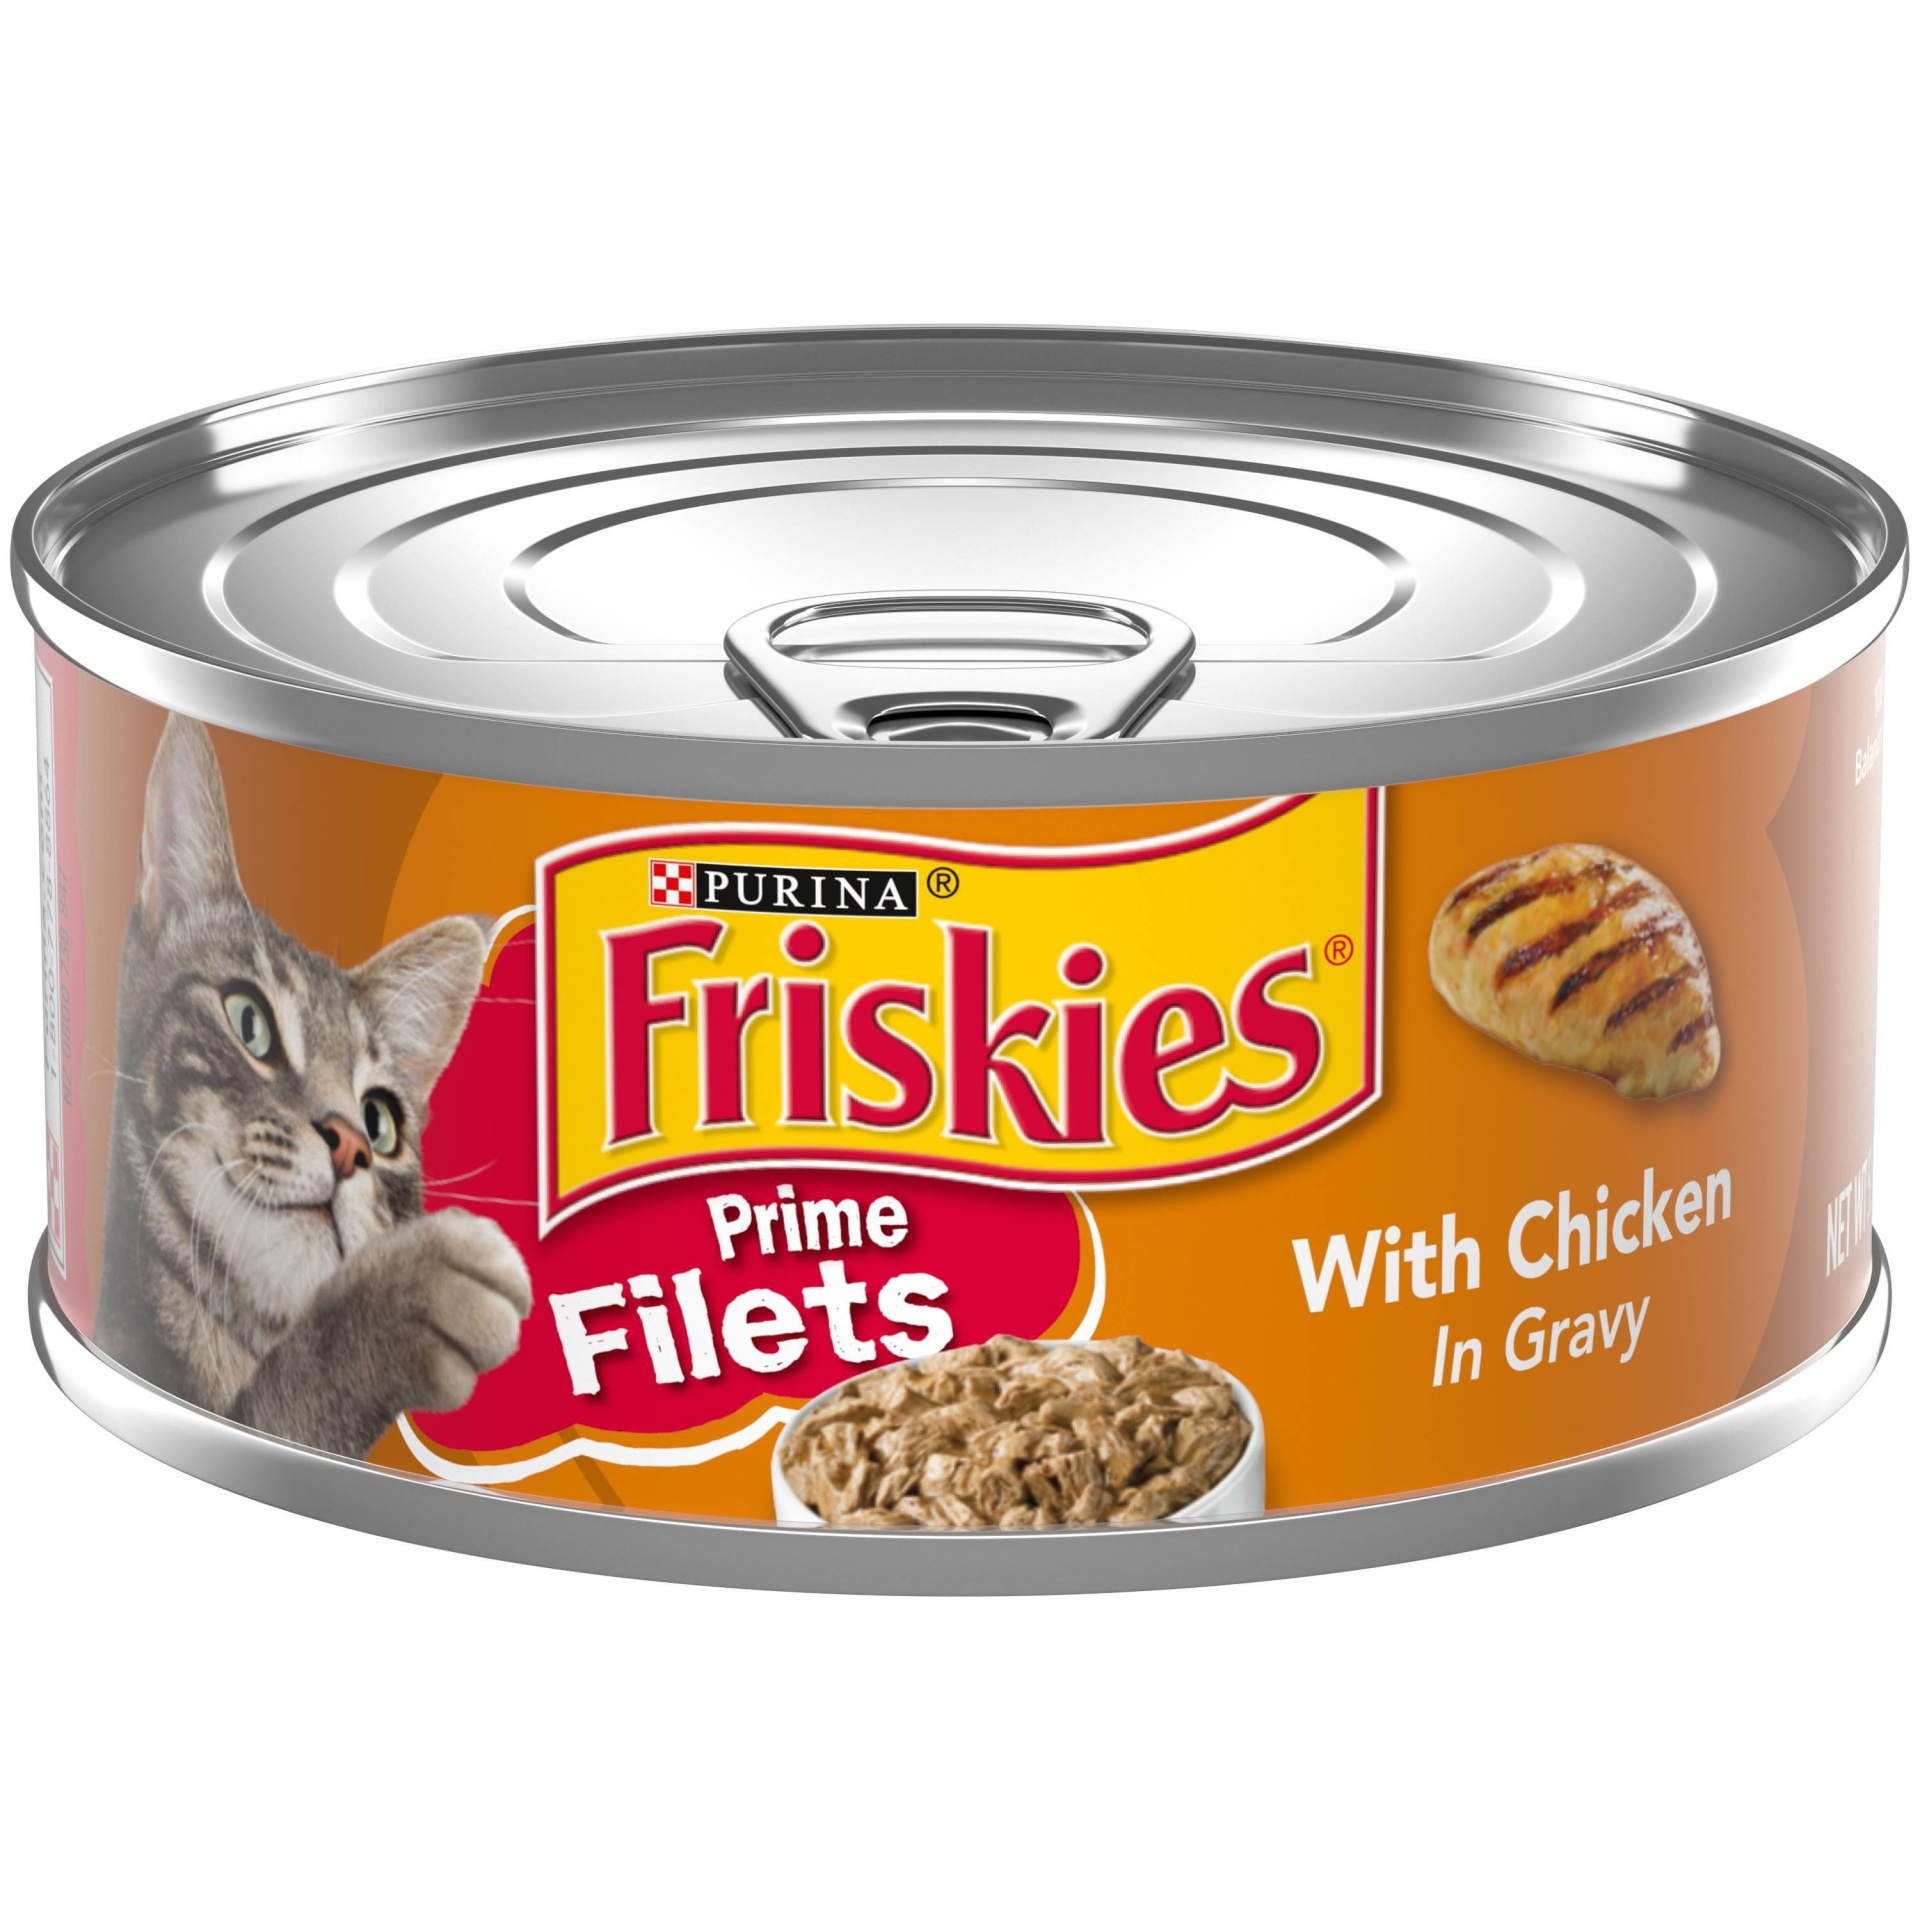 slide 1 of 1, Purina Friskies Prime Filets with Chicken in Gravy Cat Food, 5.5 oz